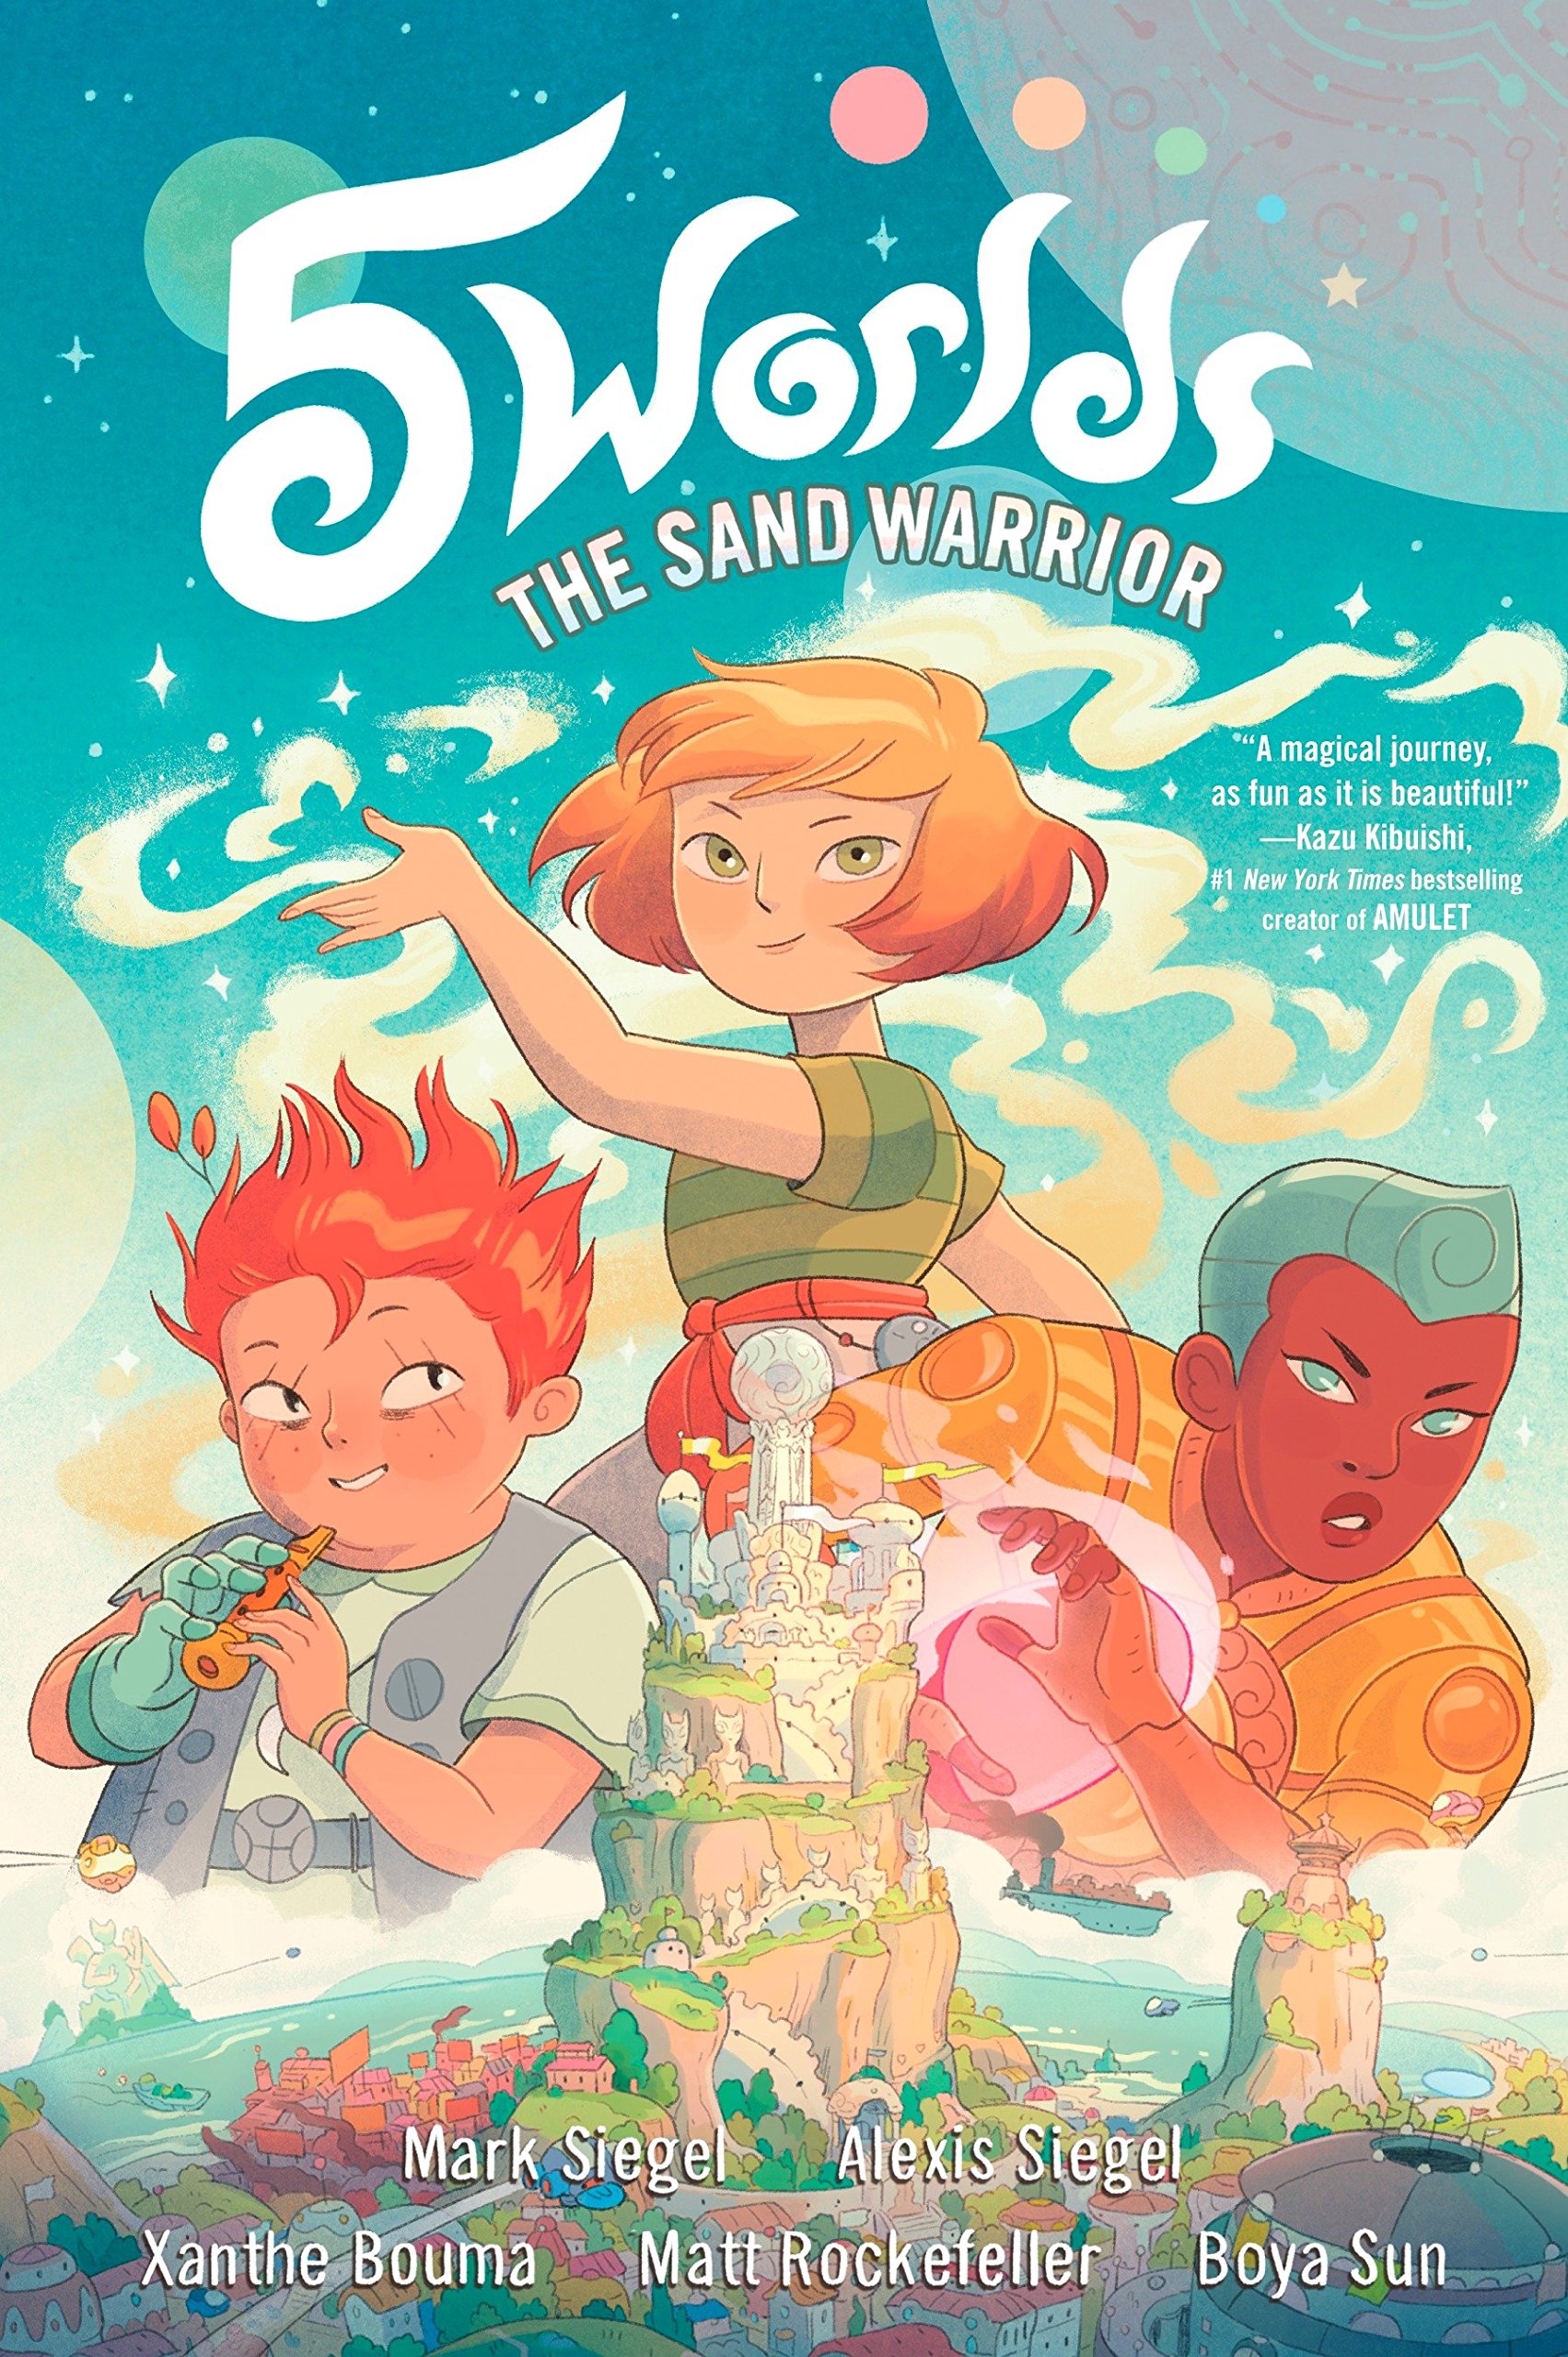 5 Worlds: The Sand Warrior graphic novel book cover